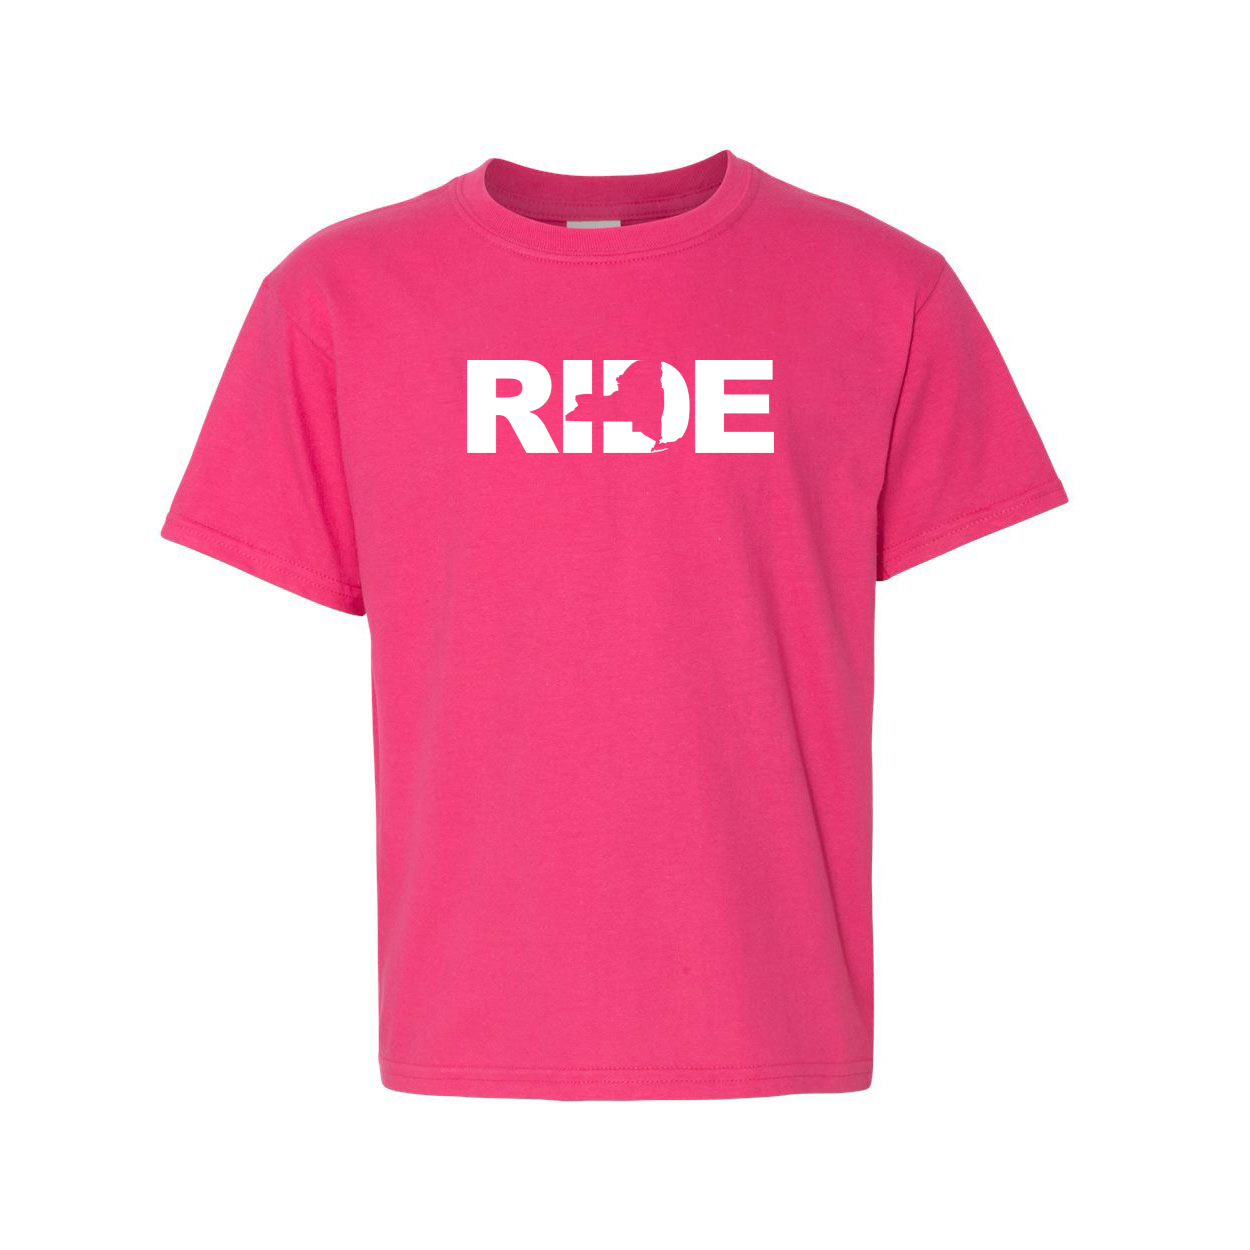 Ride New York Classic Youth T-Shirt Pink